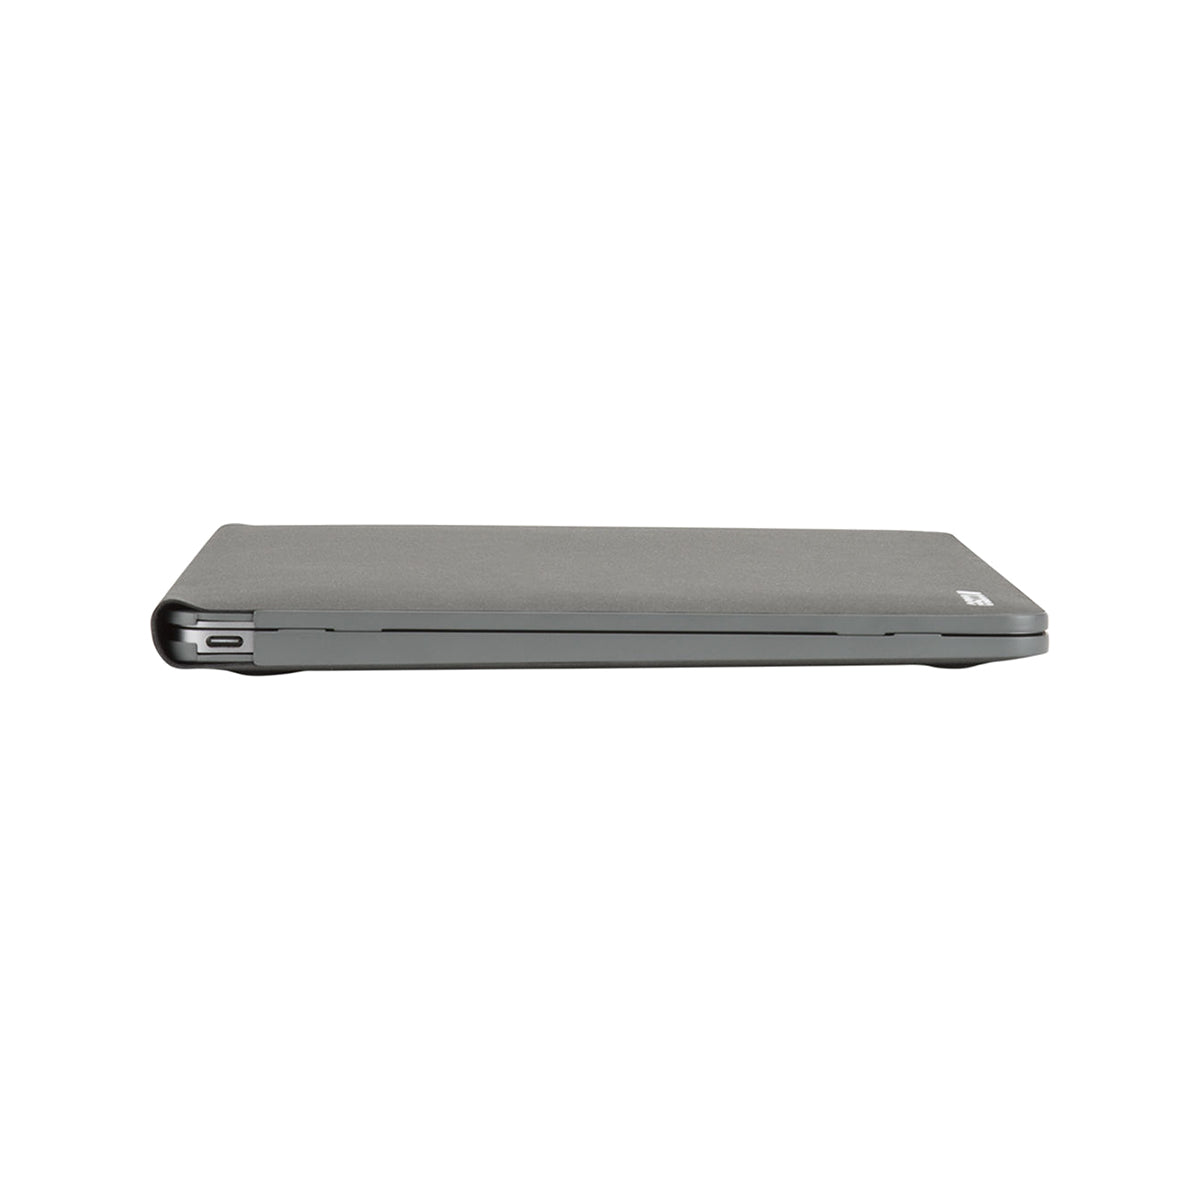 Snap Jacket for 12-inch MacBook - Charcoal